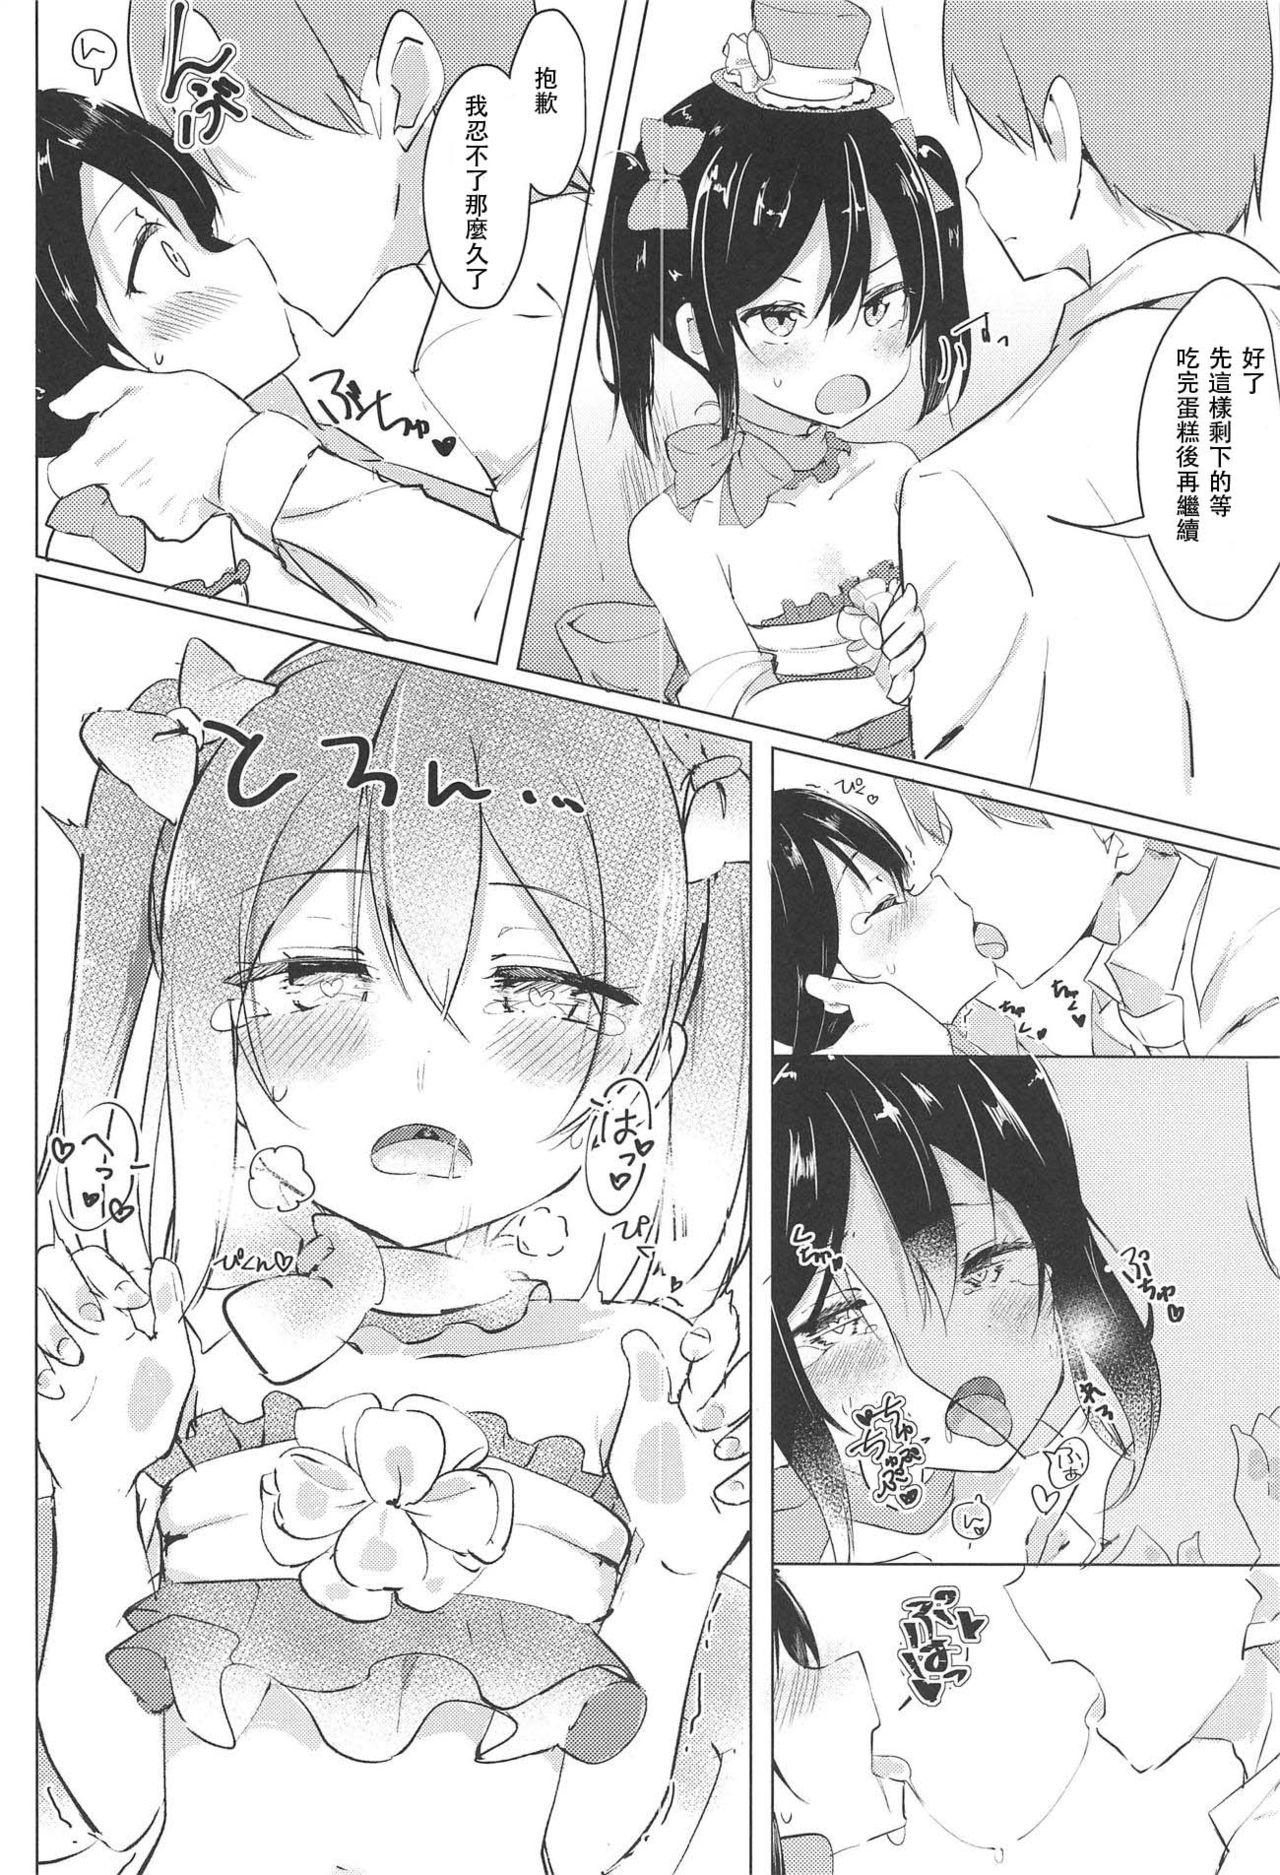 Scandal Smile for you. - Love live Gay Pawnshop - Page 8